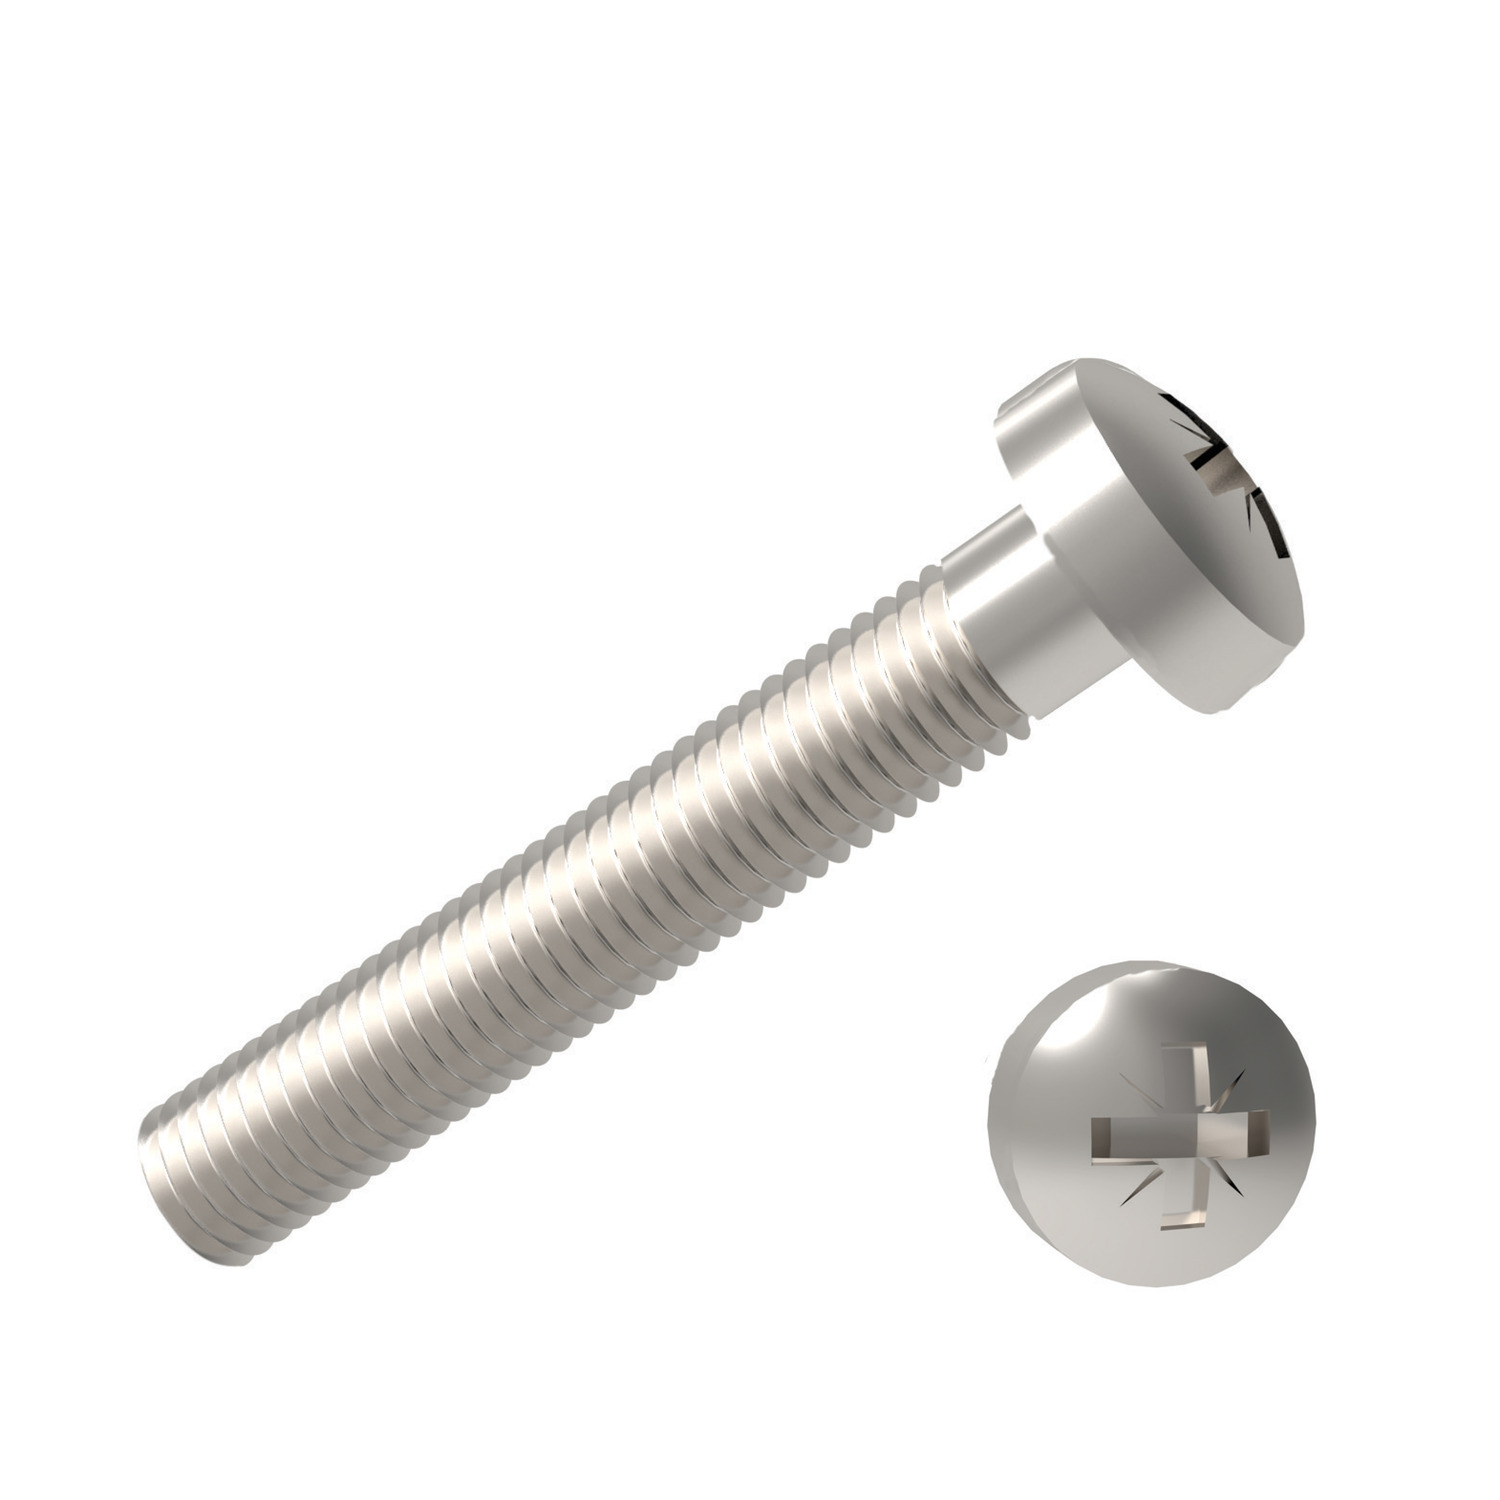 Product P0235.A2, Pozi Pan Head Screws Pozi - A2 stainless / 